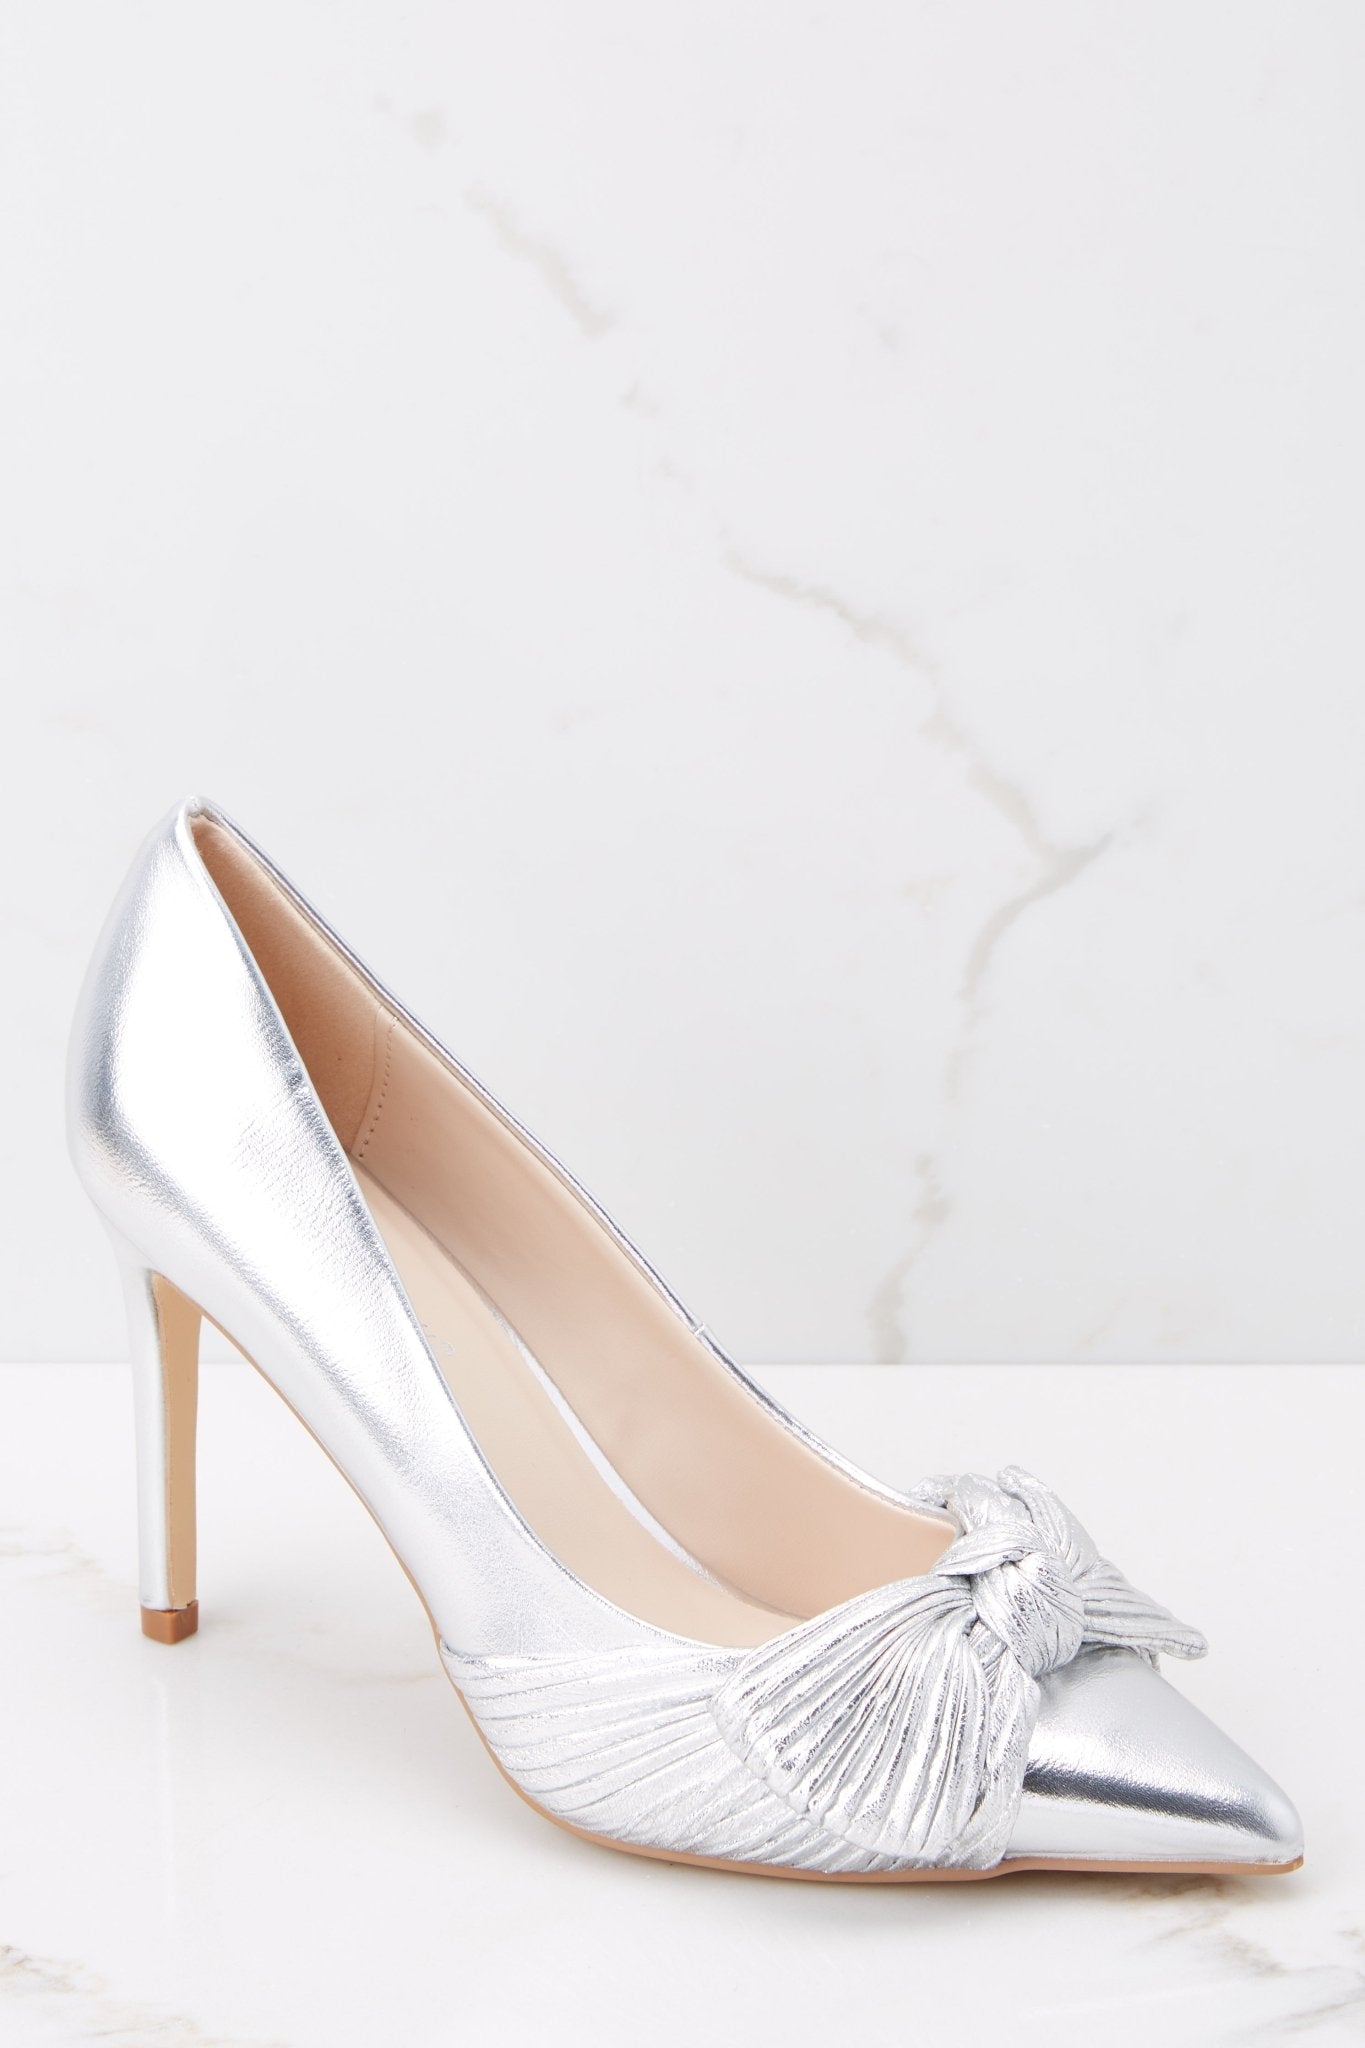 Lib Pointed Toe Stiletto Heels Glitters Slippers Sandals - Silver in Sexy  Heels & Platforms - $58.95